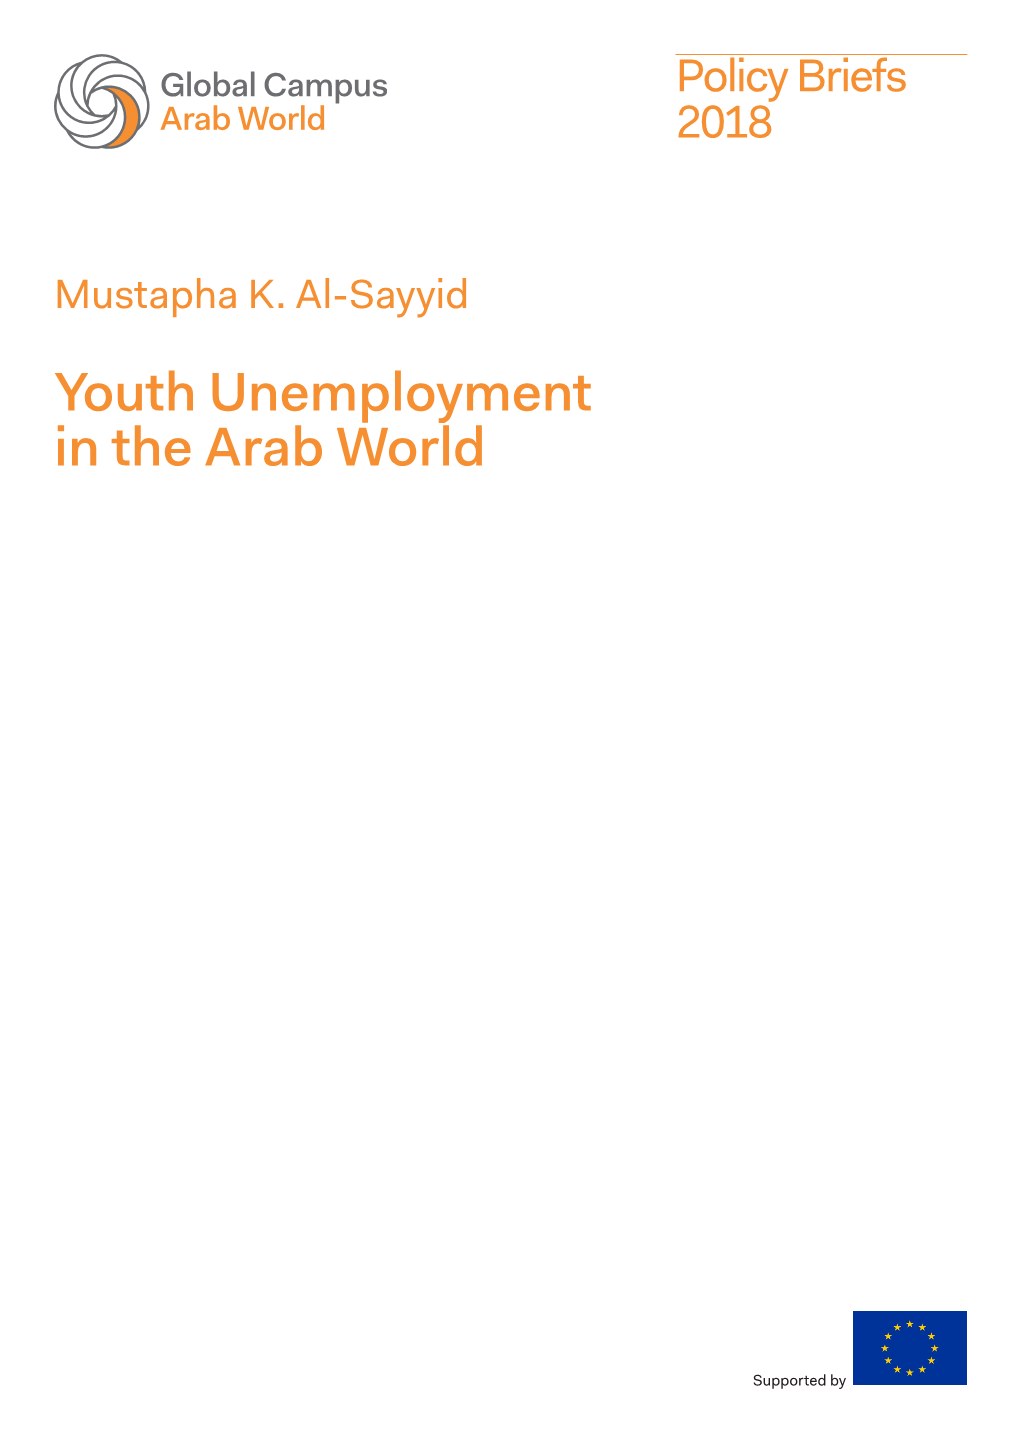 Youth Unemployment in the Arab World